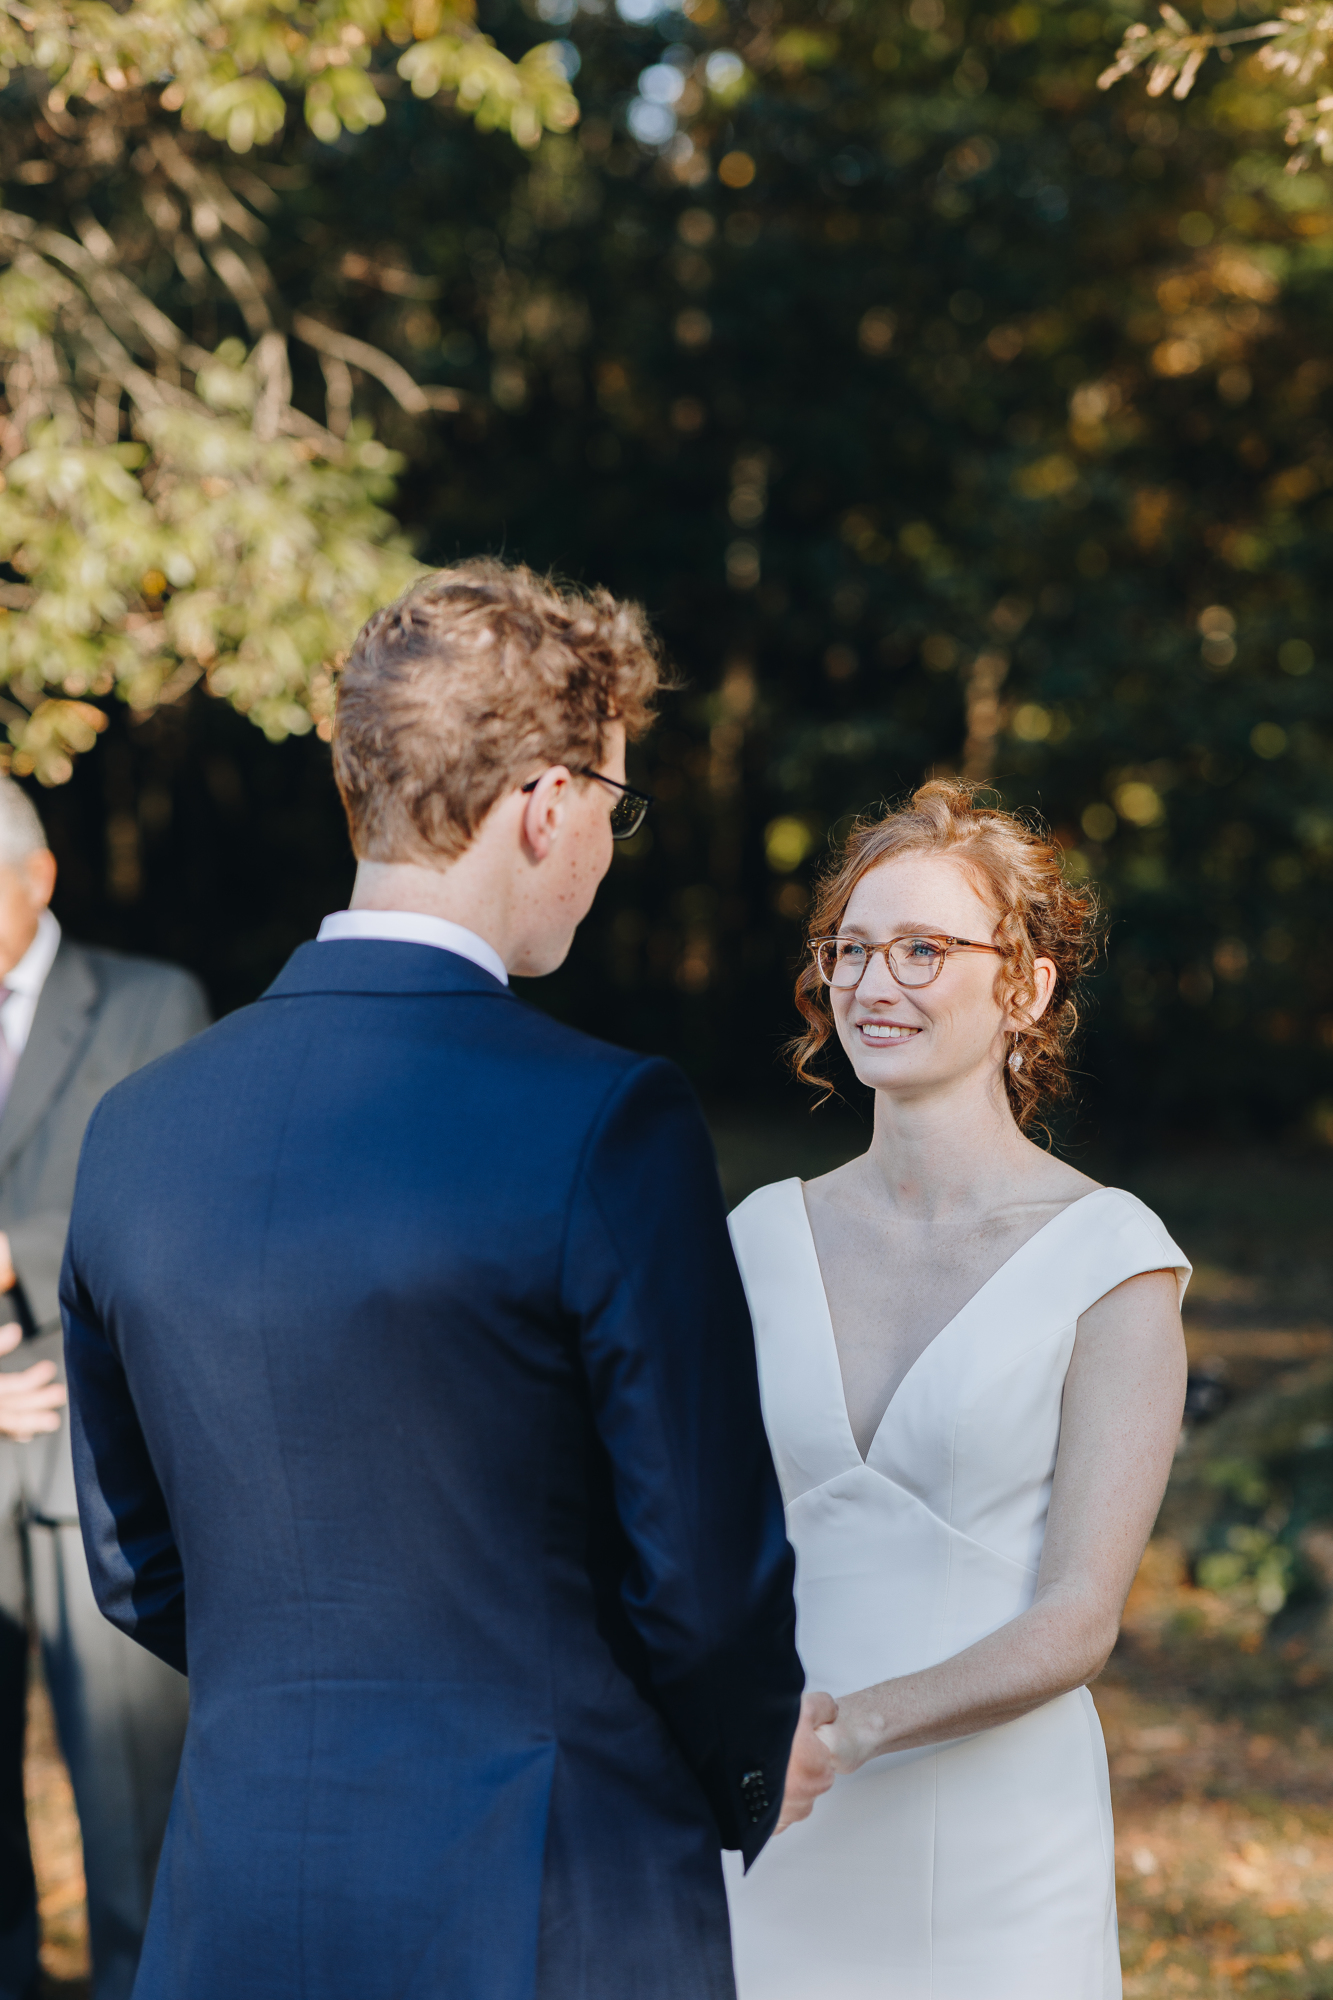 Fall elopement at Prospect Park in Brooklyn